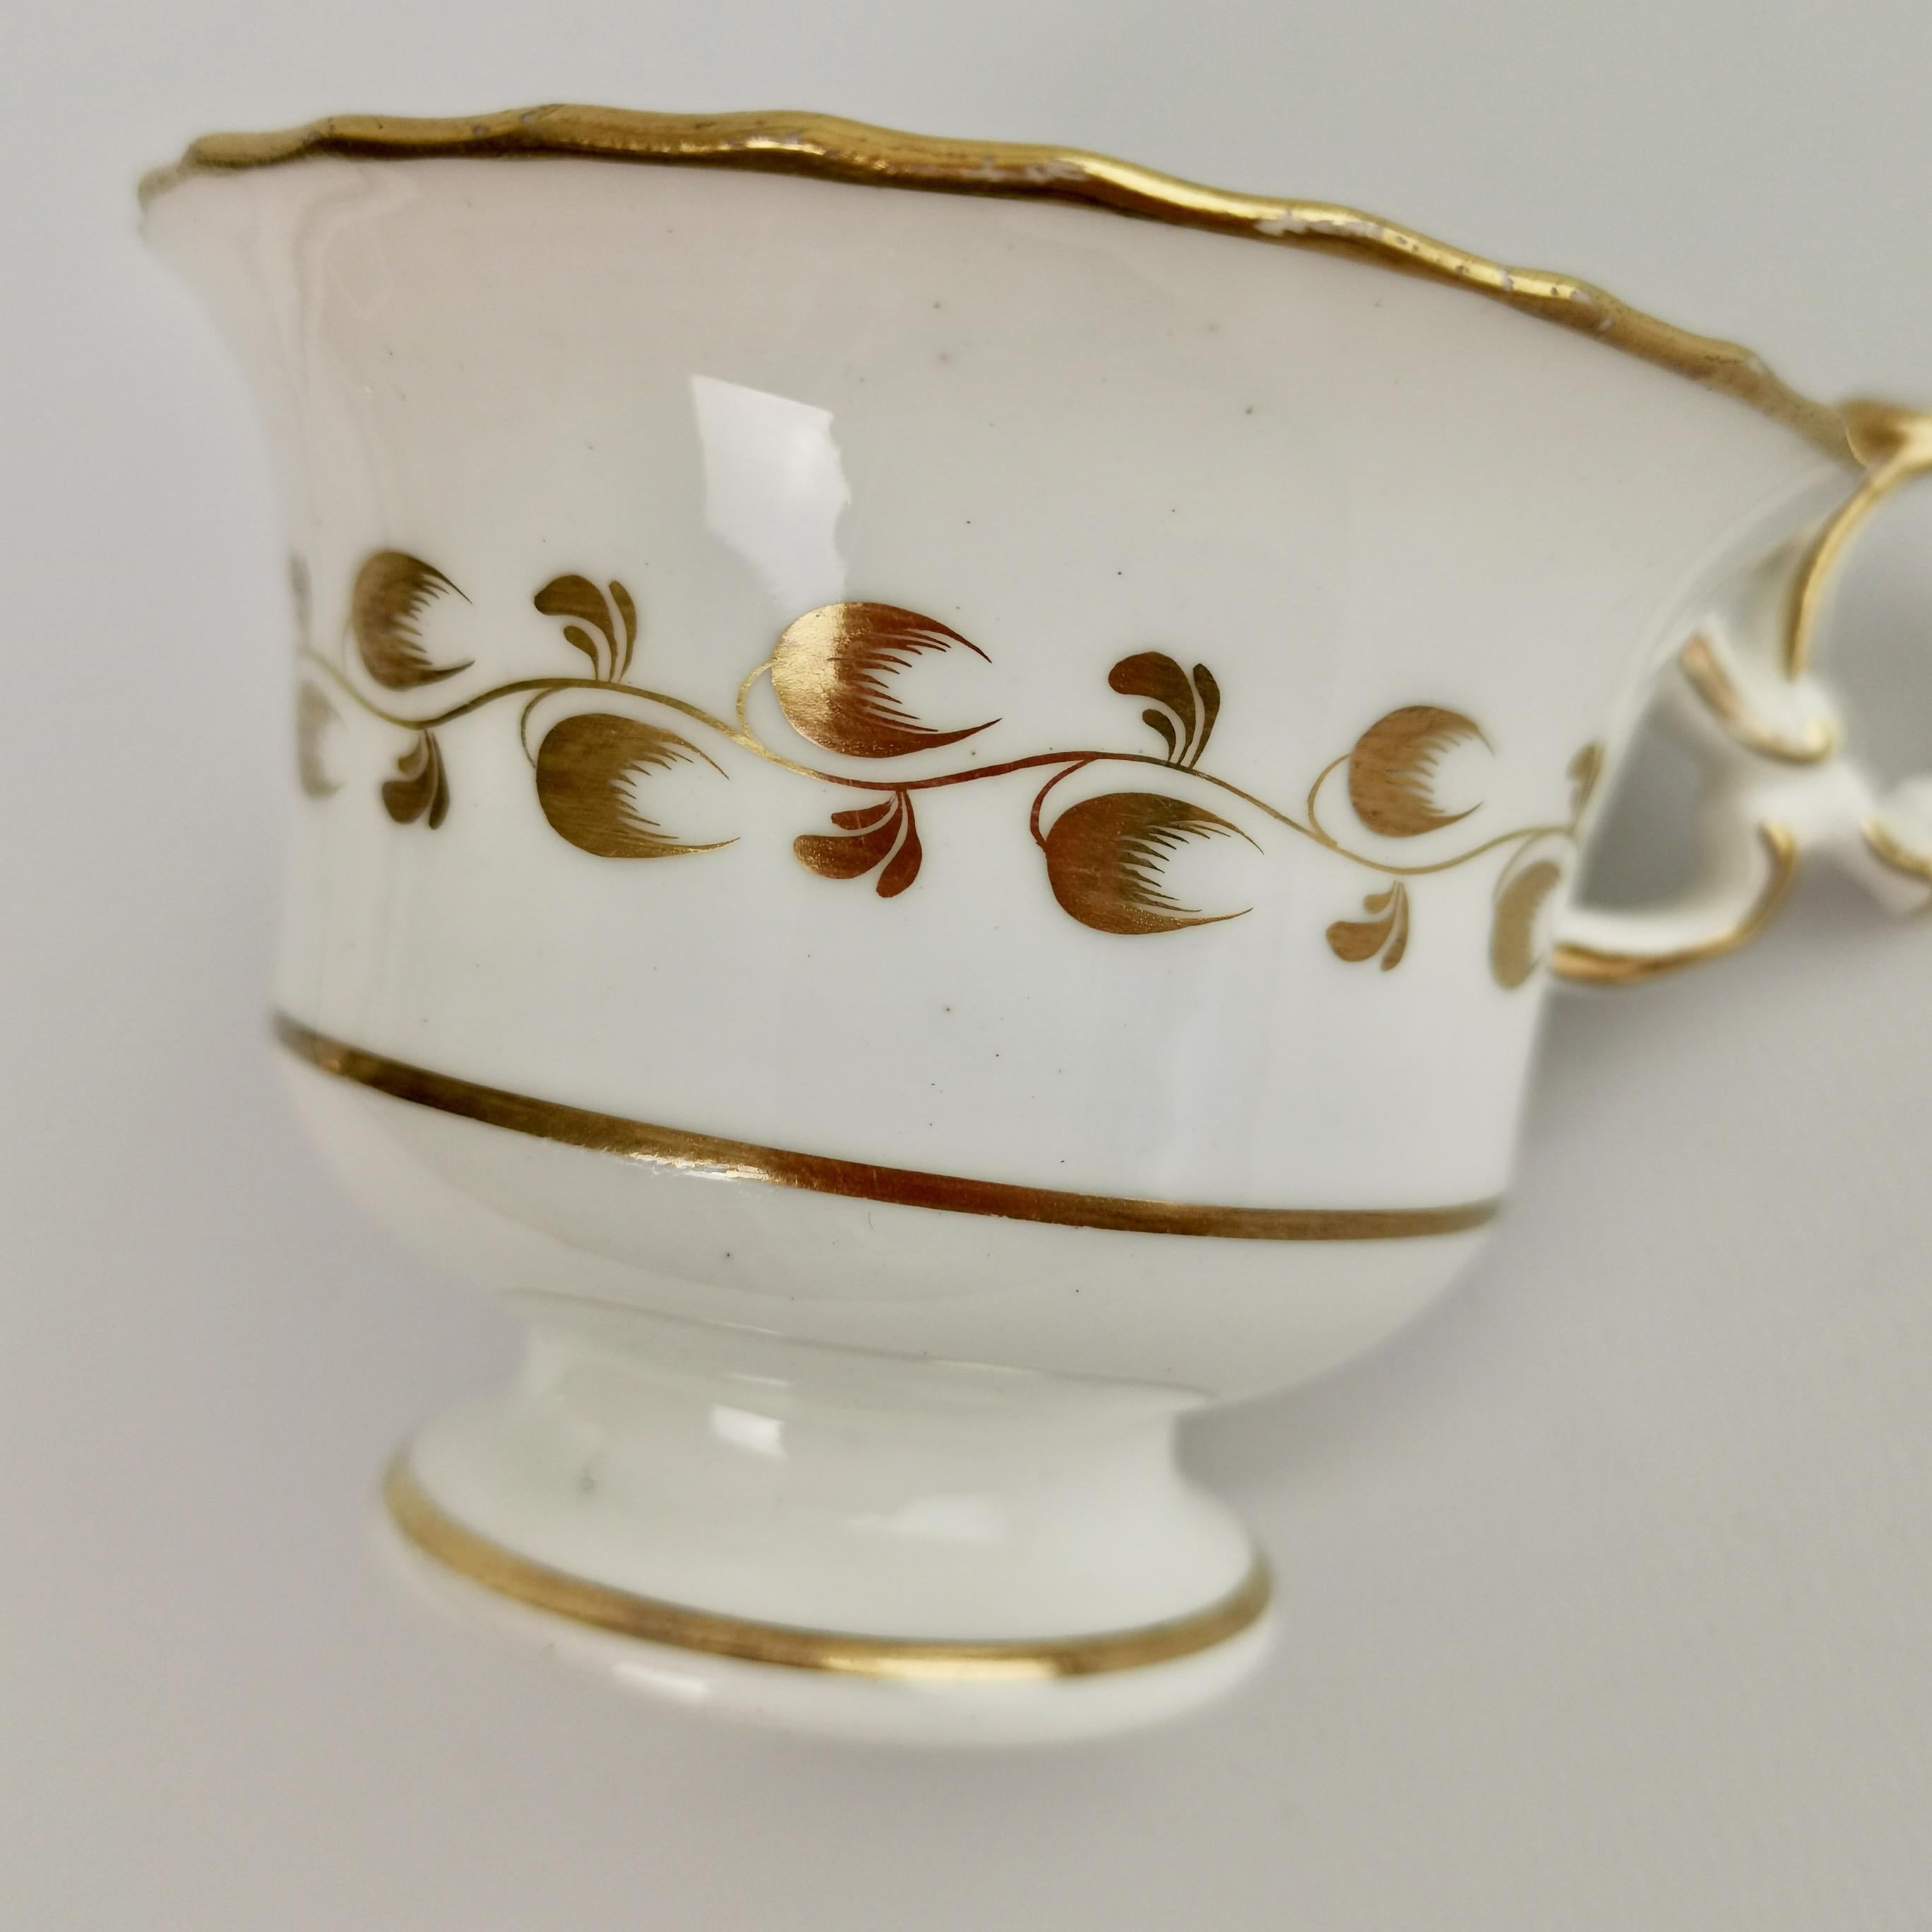 Minton Porcelain Orphaned Coffee Cup, Green with Flowers, ca 1825 3